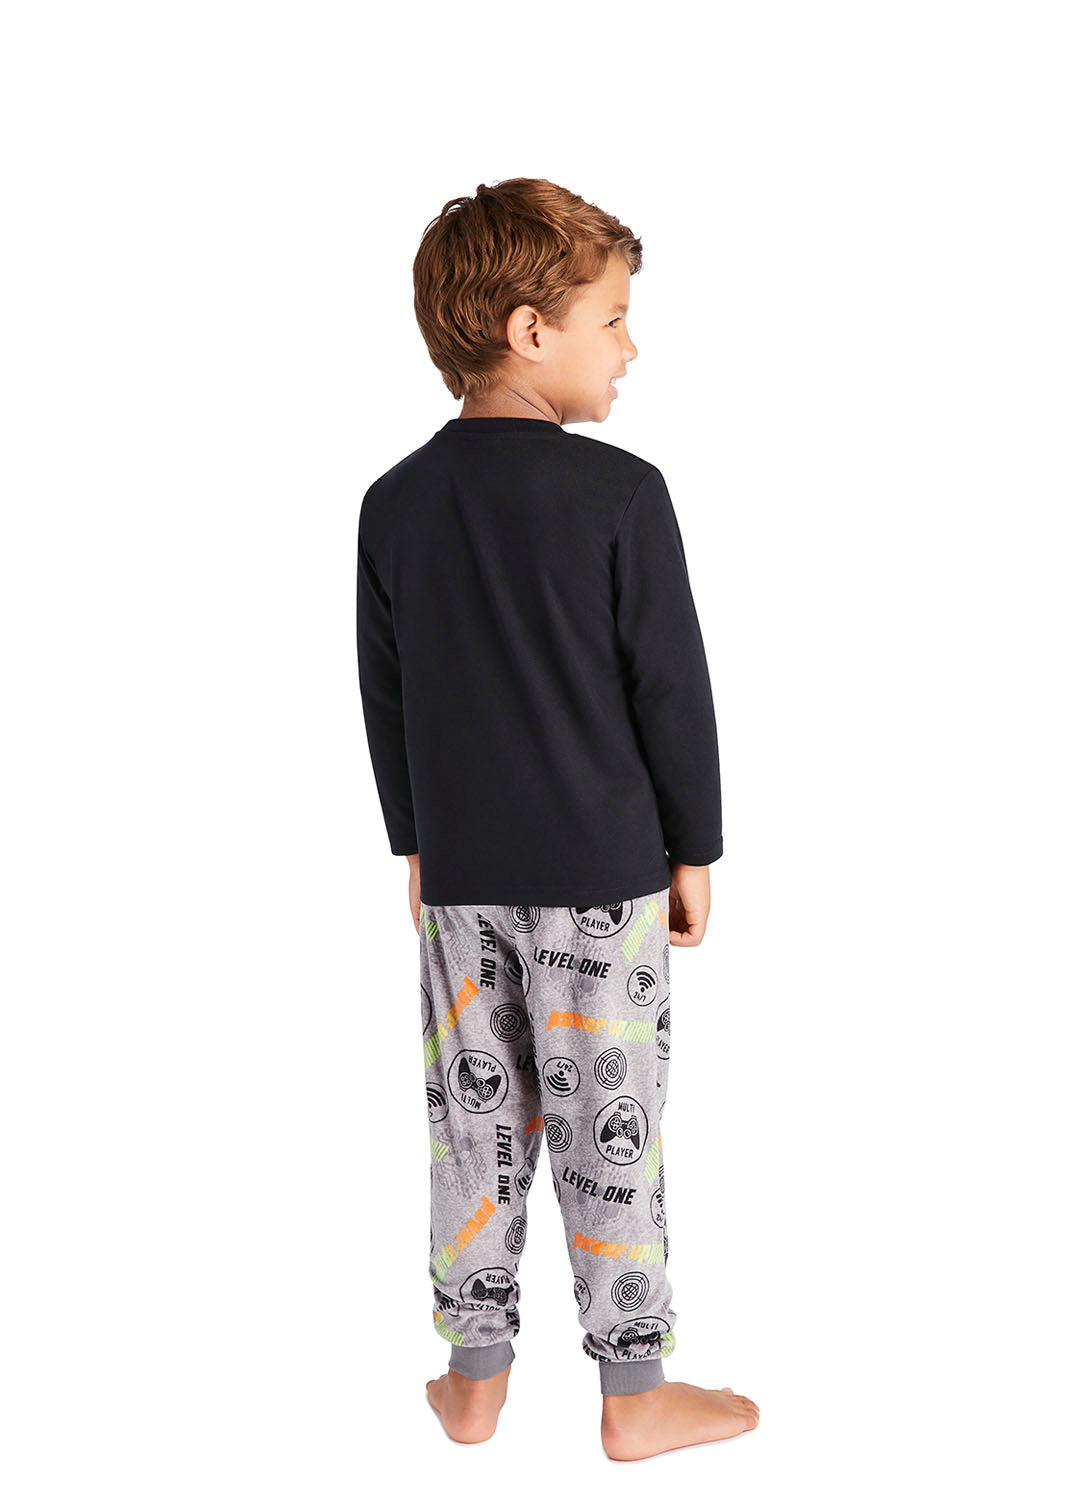 Back view Little boy wearing Pajama Set with gamer print in black na d grey colours